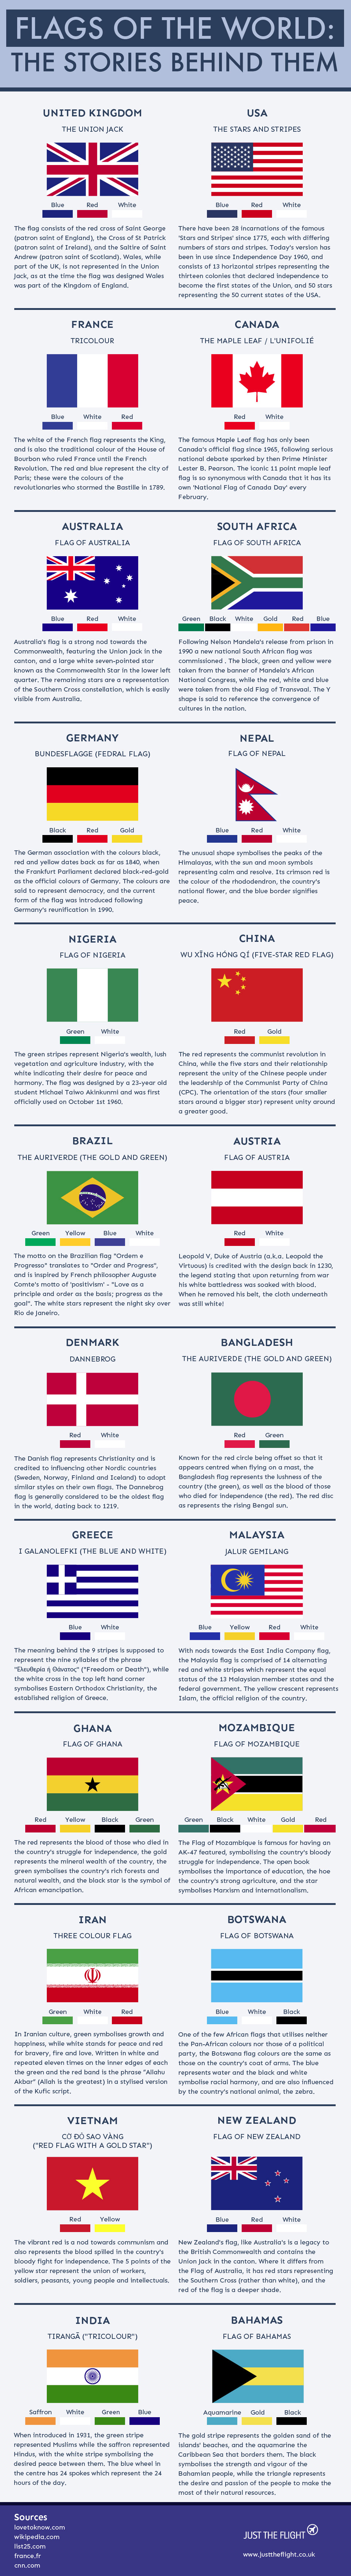 Flags of the World: The Stories Behind Them